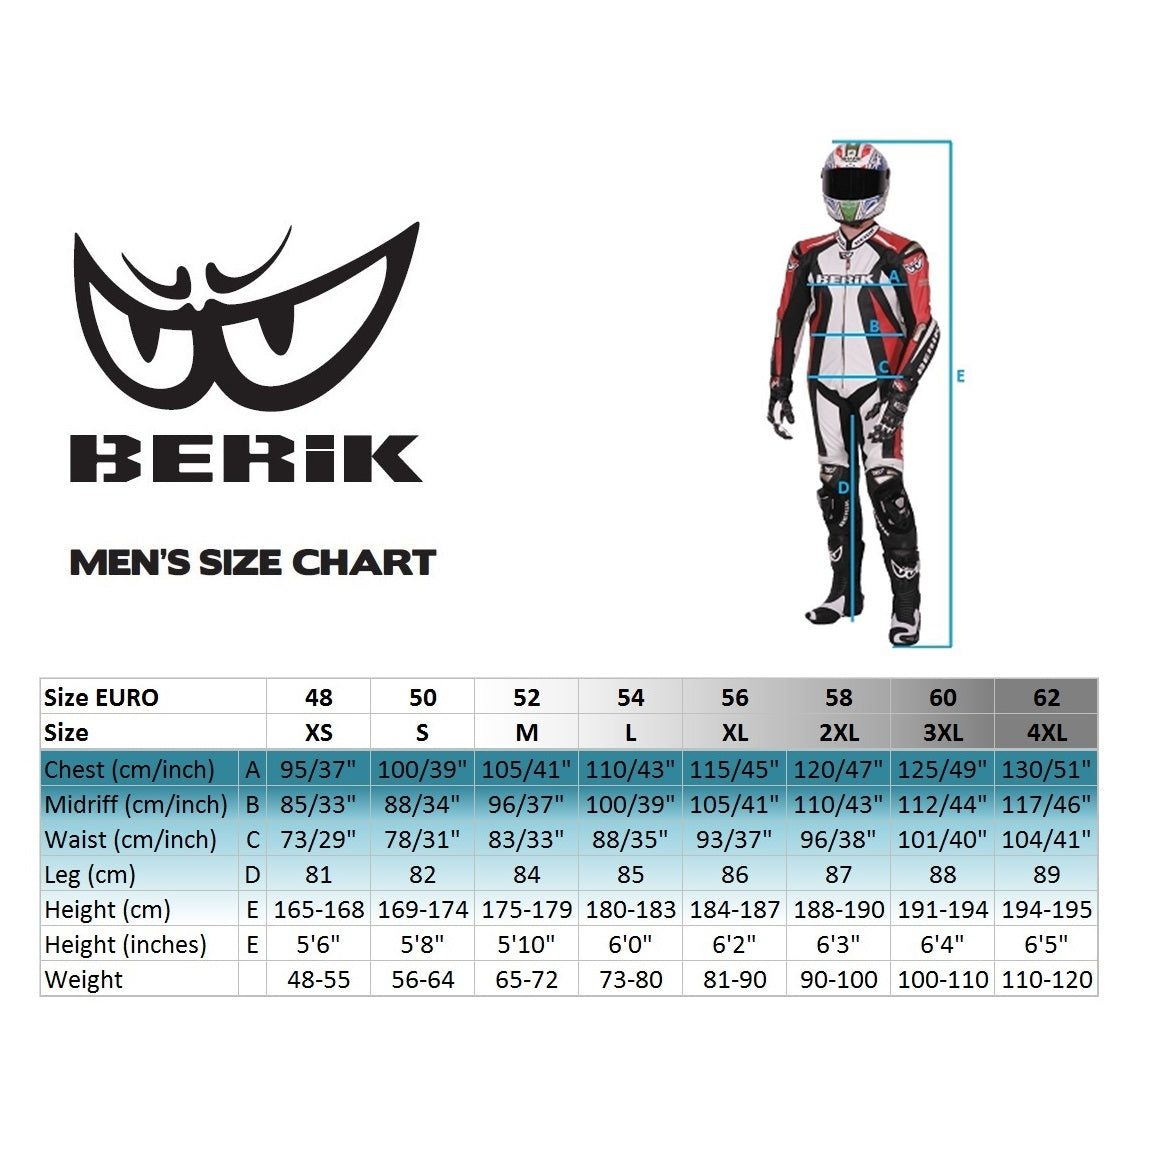 Berik - Chiffre Perforated Leather Jacket Size Guide